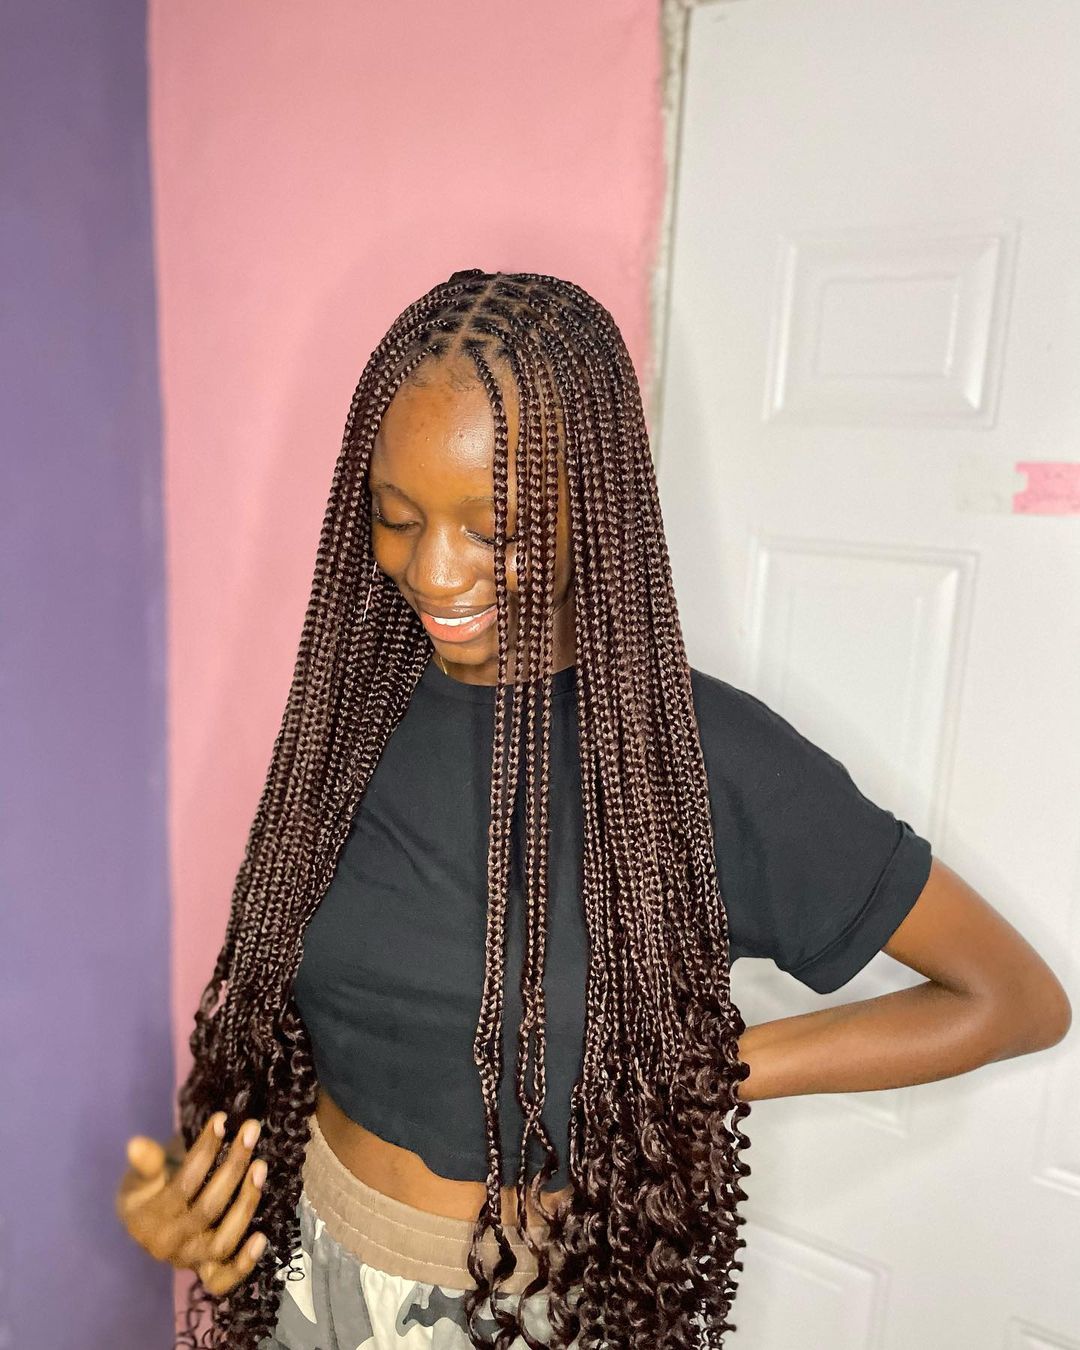 35 Knotless Box Braids That Will Inspire You to Experiment- Hairstyle